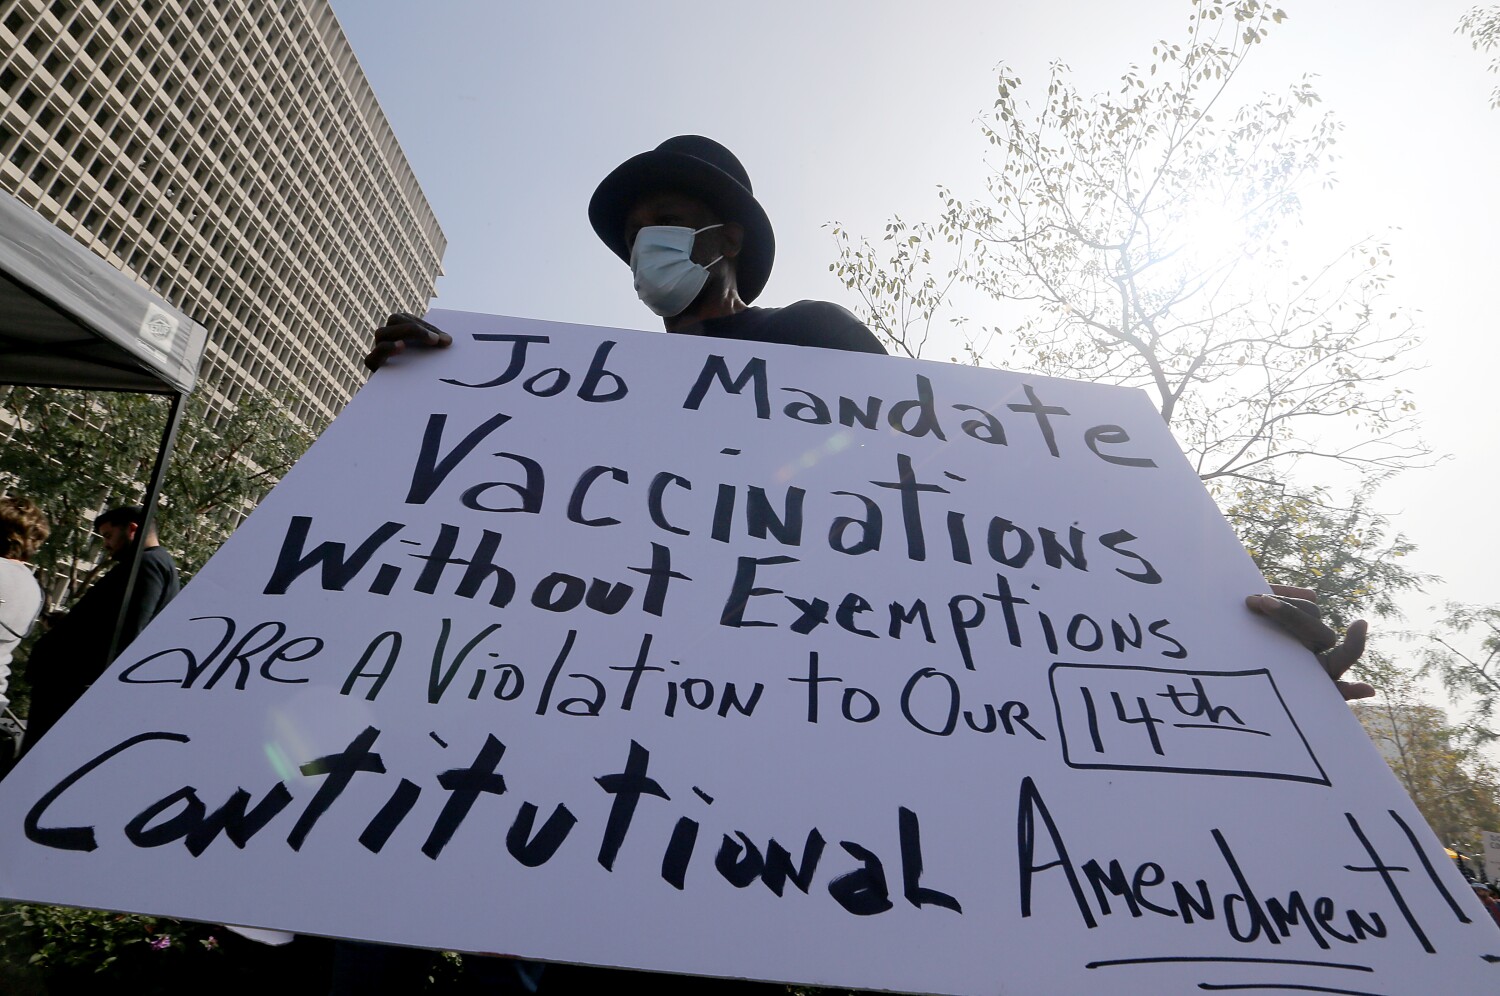 Beverly Hills firefighters sue over vaccine mandate they call 'experimental gene modification'